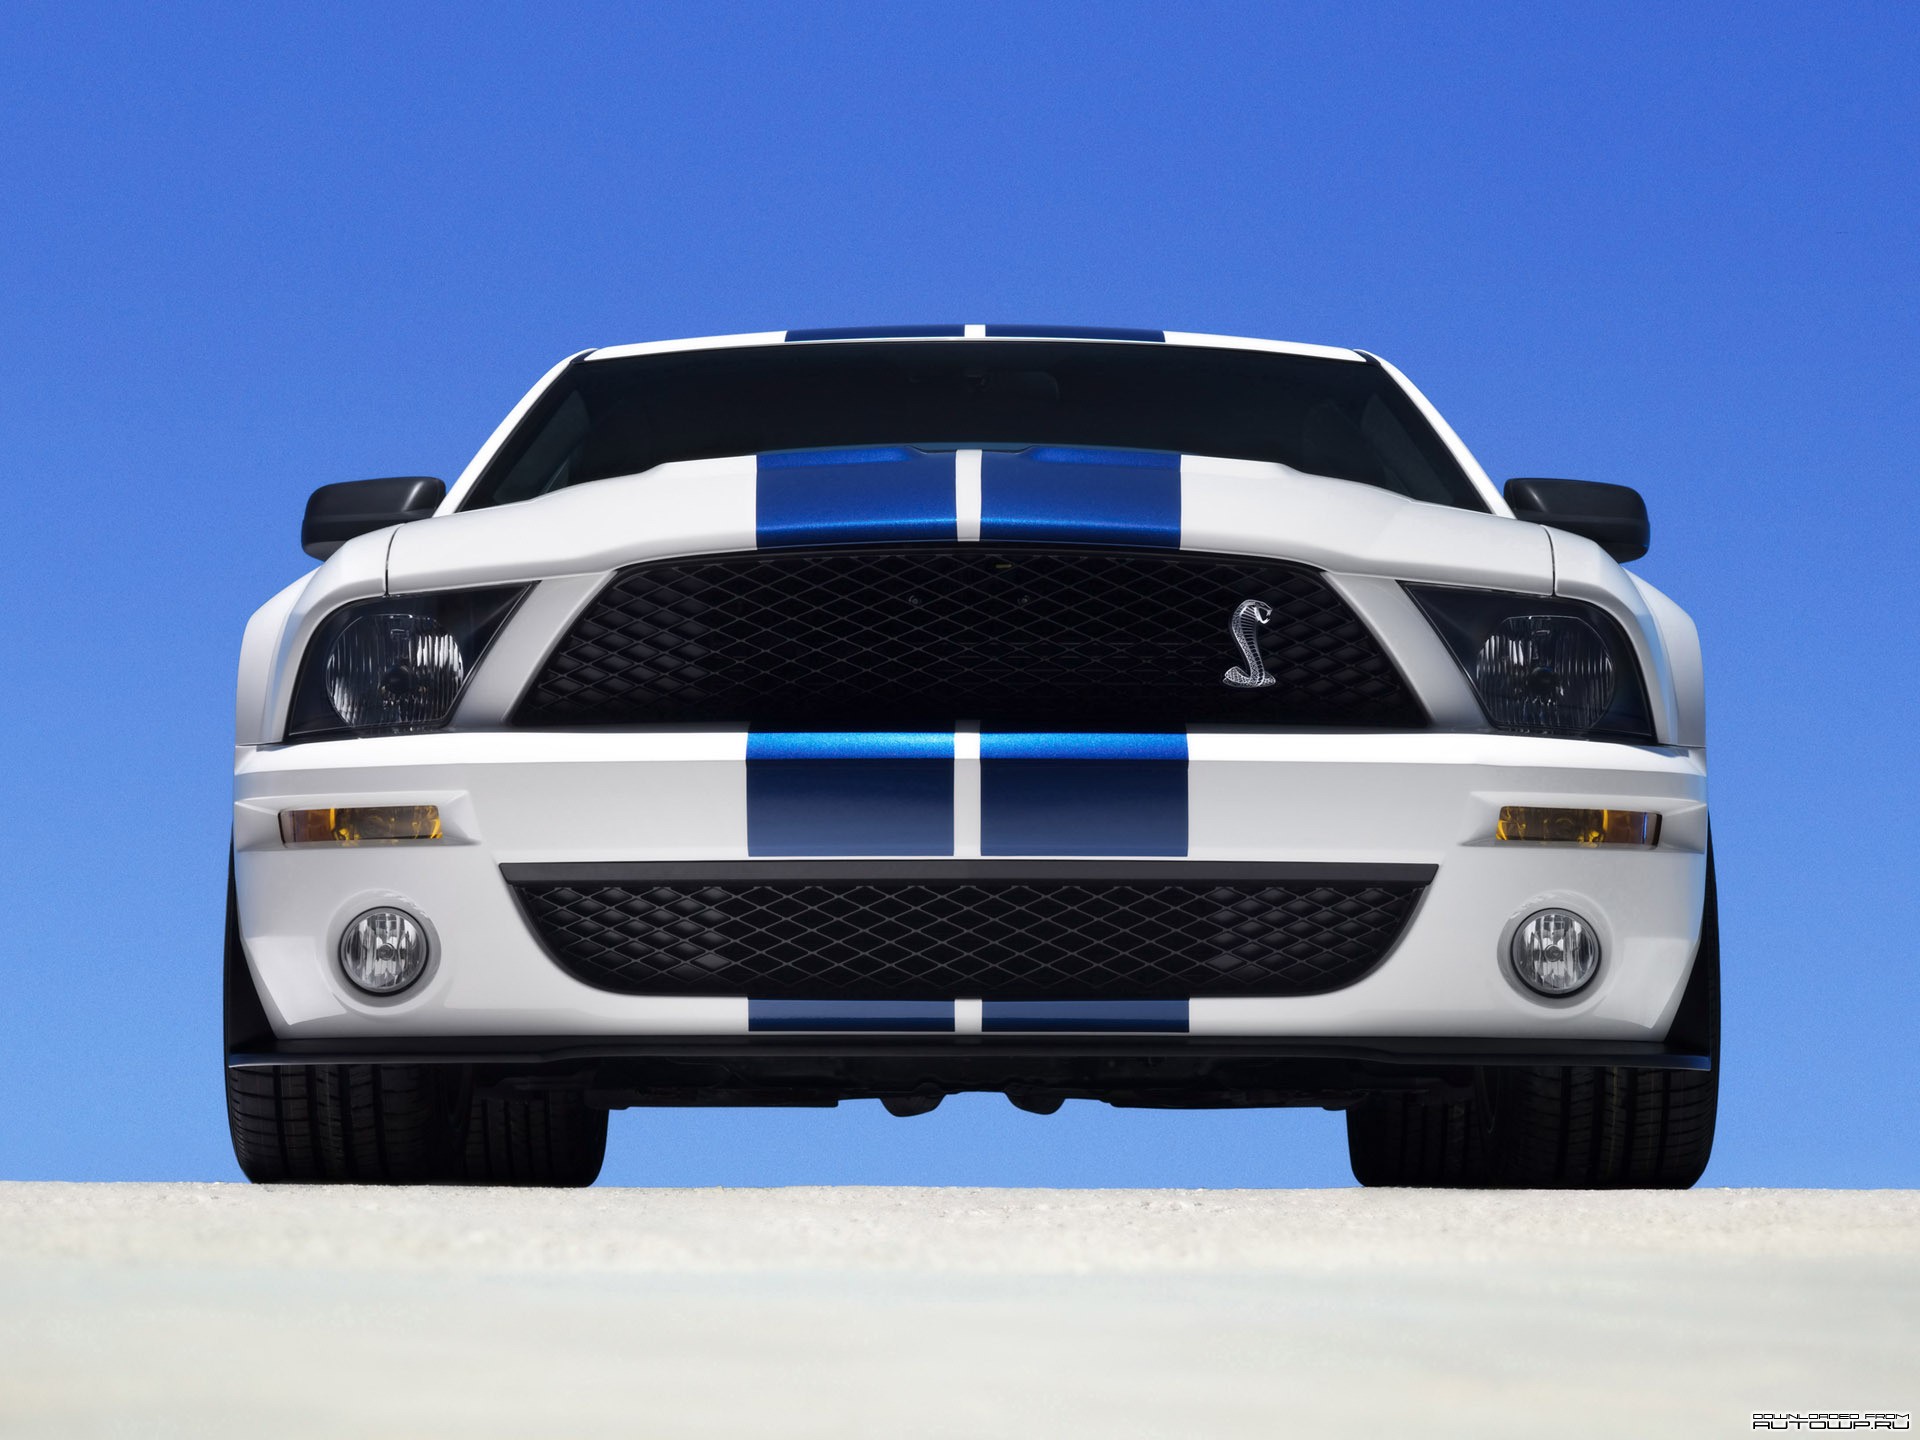 General 1920x1440 car Ford Mustang Ford Mustang Shelby racing stripes frontal view worm's eye view Ford vehicle white cars Ford Mustang S-197 muscle cars American cars